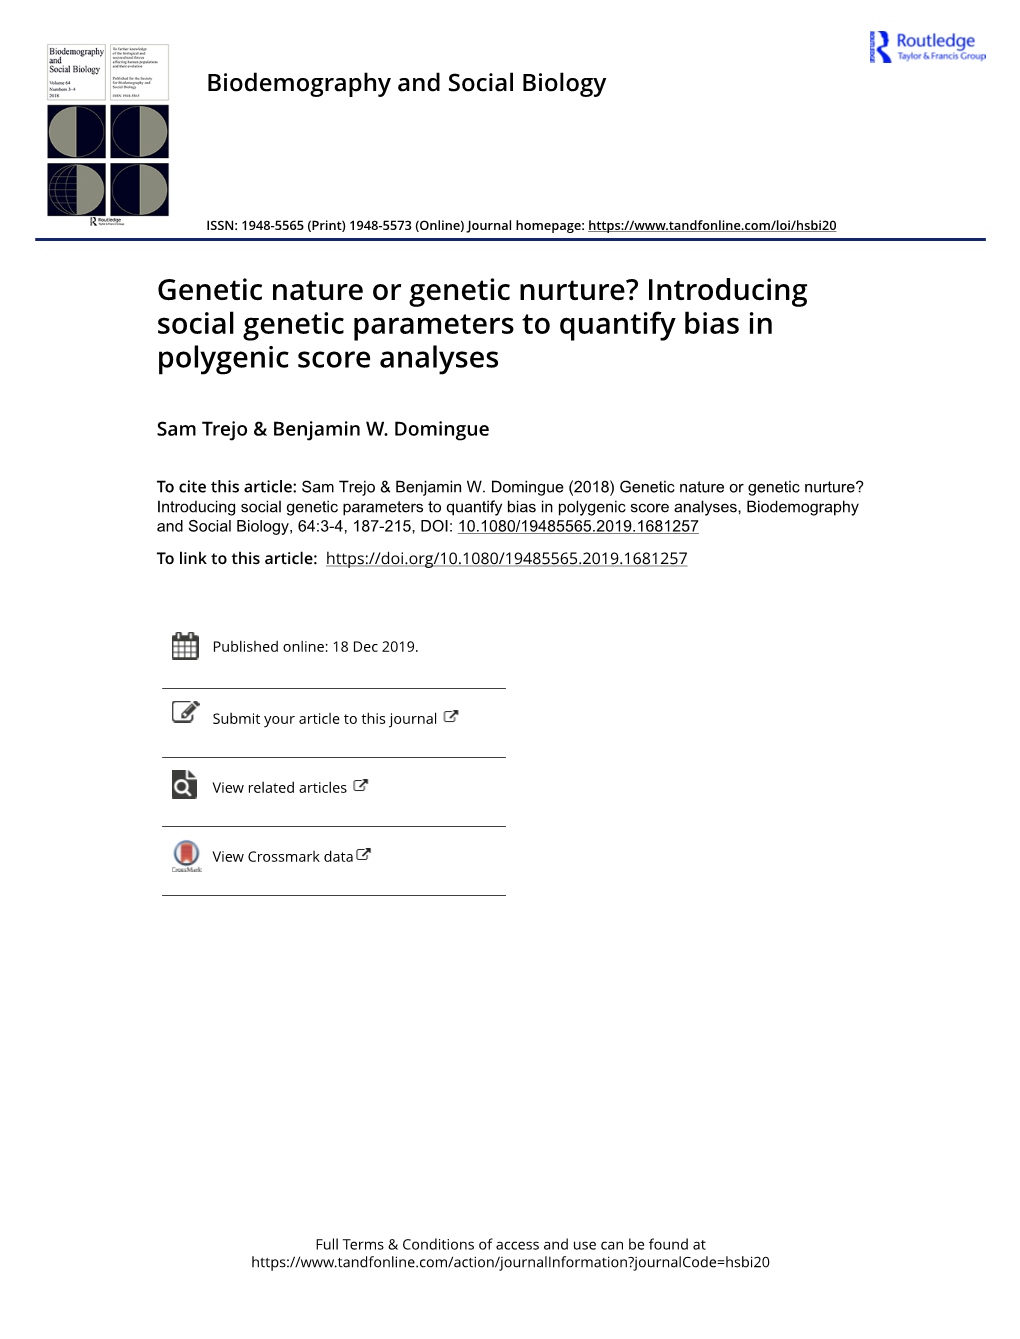 Introducing Social Genetic Parameters to Quantify Bias in Polygenic Score Analyses